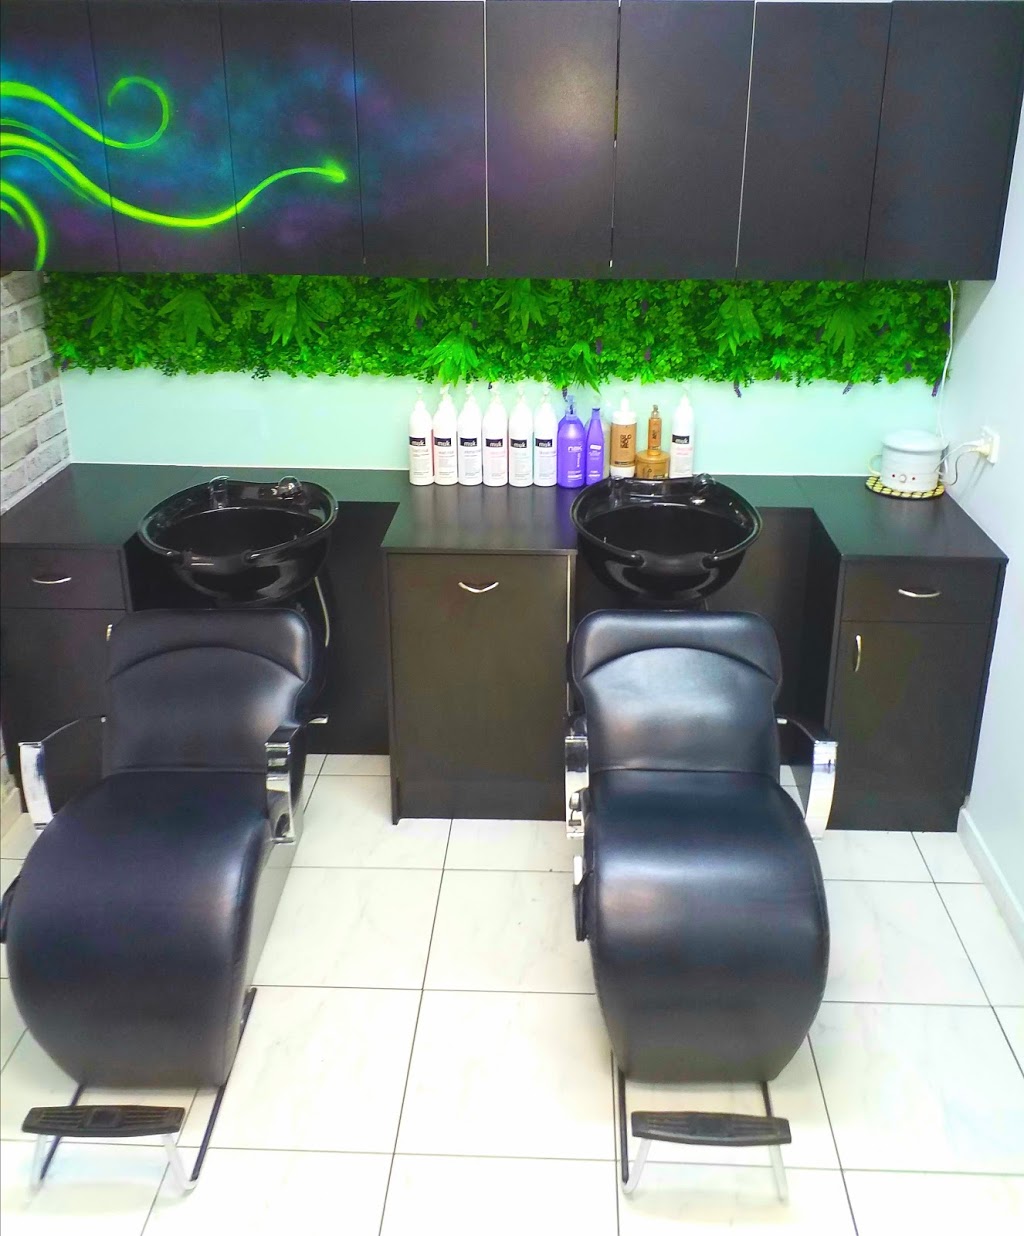 Style Counsel Hair & Beauty | hair care | shop 2/123 Winstanley St, Carina Heights QLD 4152, Australia | 0733950519 OR +61 7 3395 0519